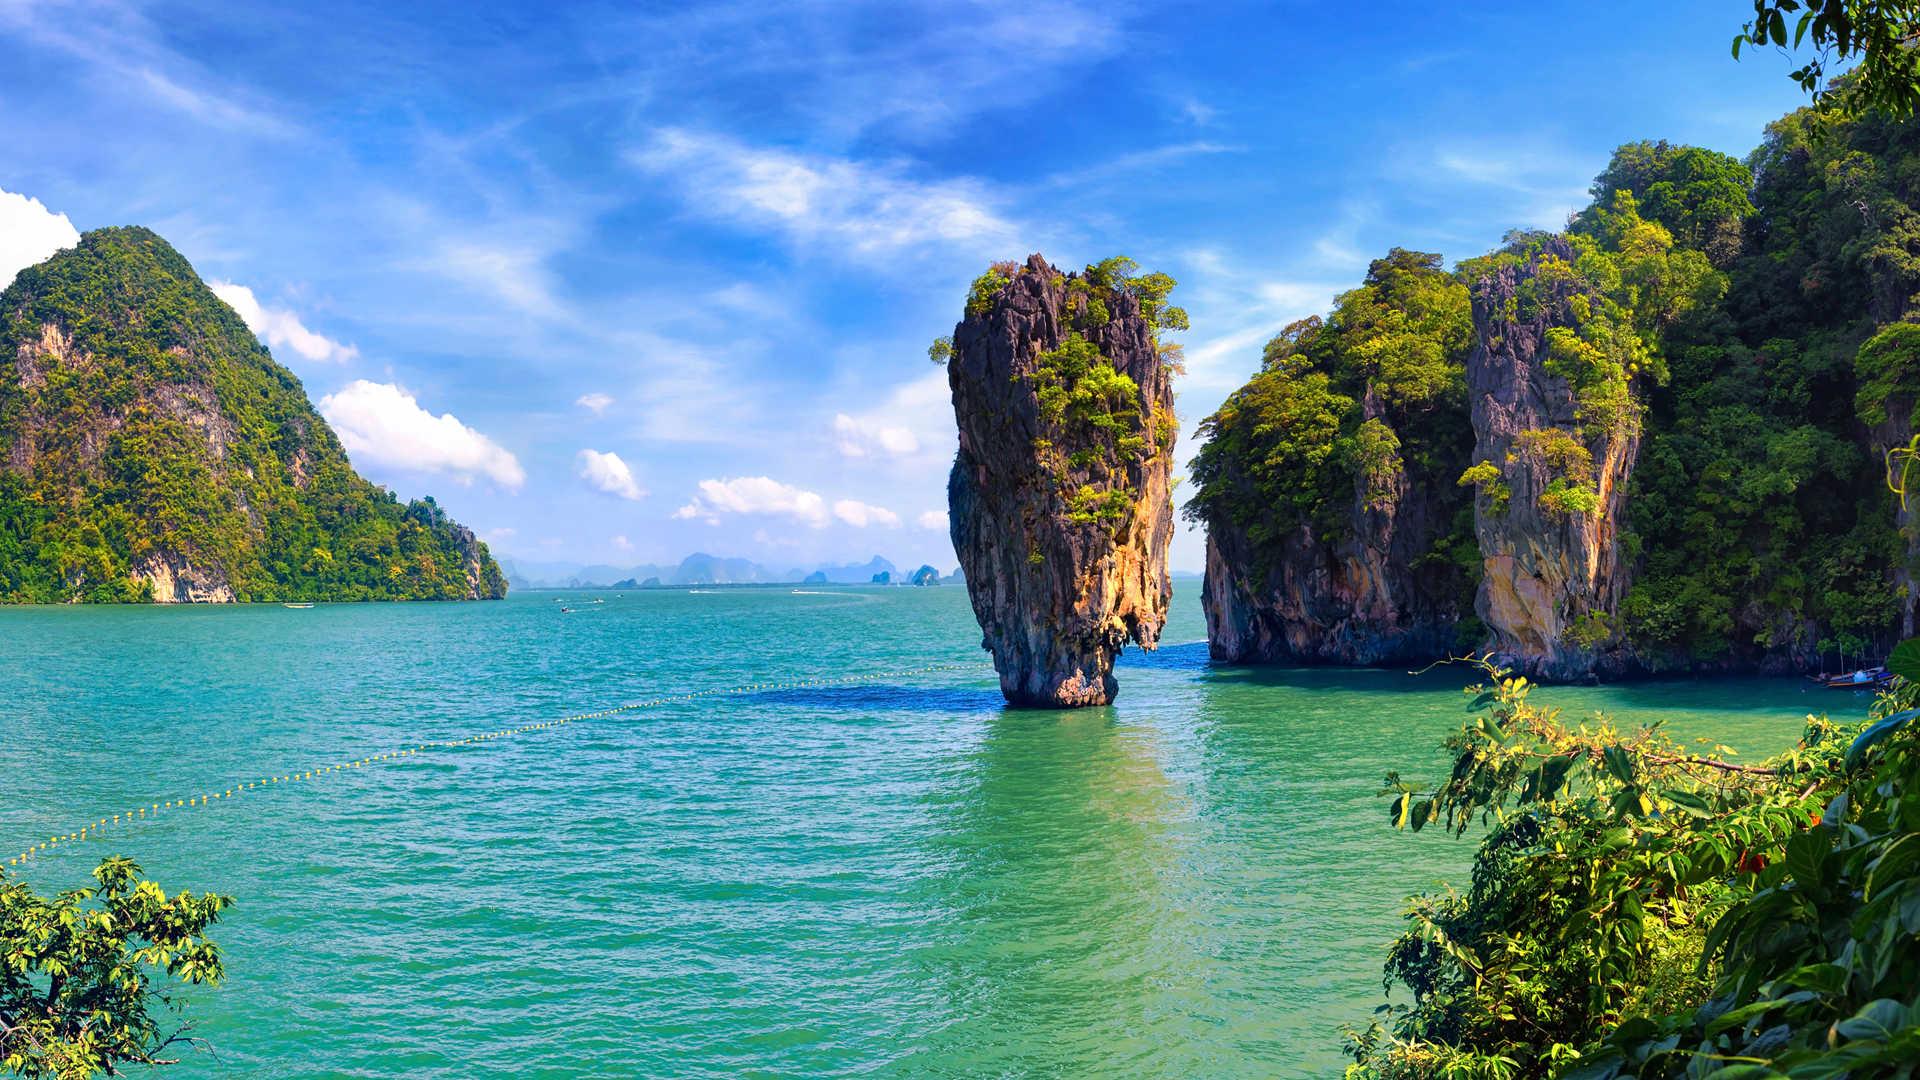 Phuket Holidays. Book For 2019 2020 With Our Phuket Experts Today